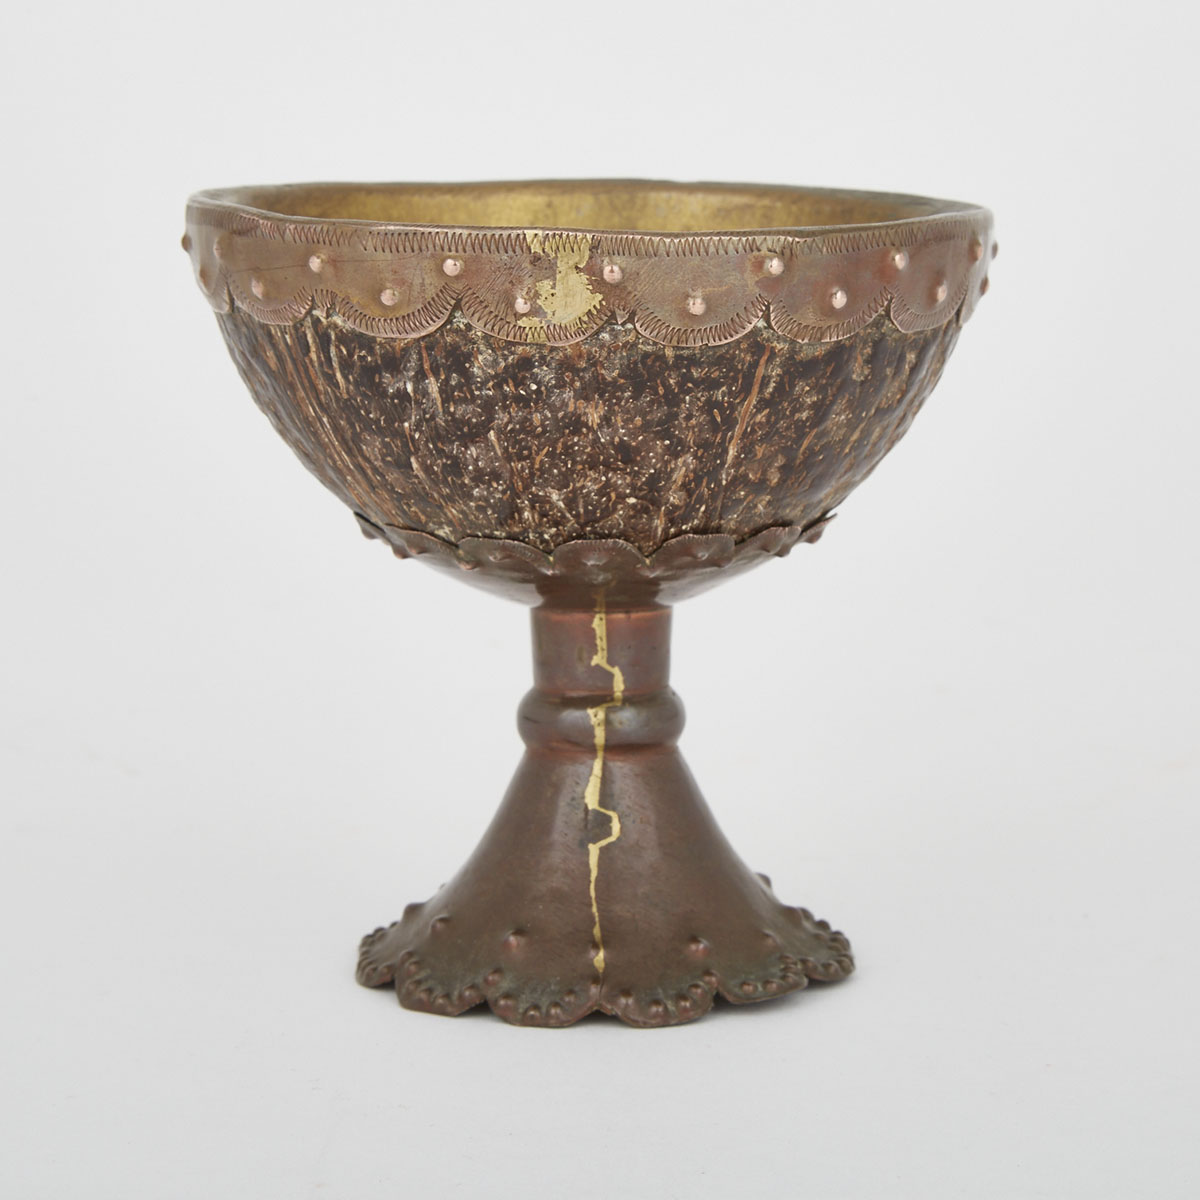 Continental Gilt Copper Mounted Coconut Cup, early 19th century